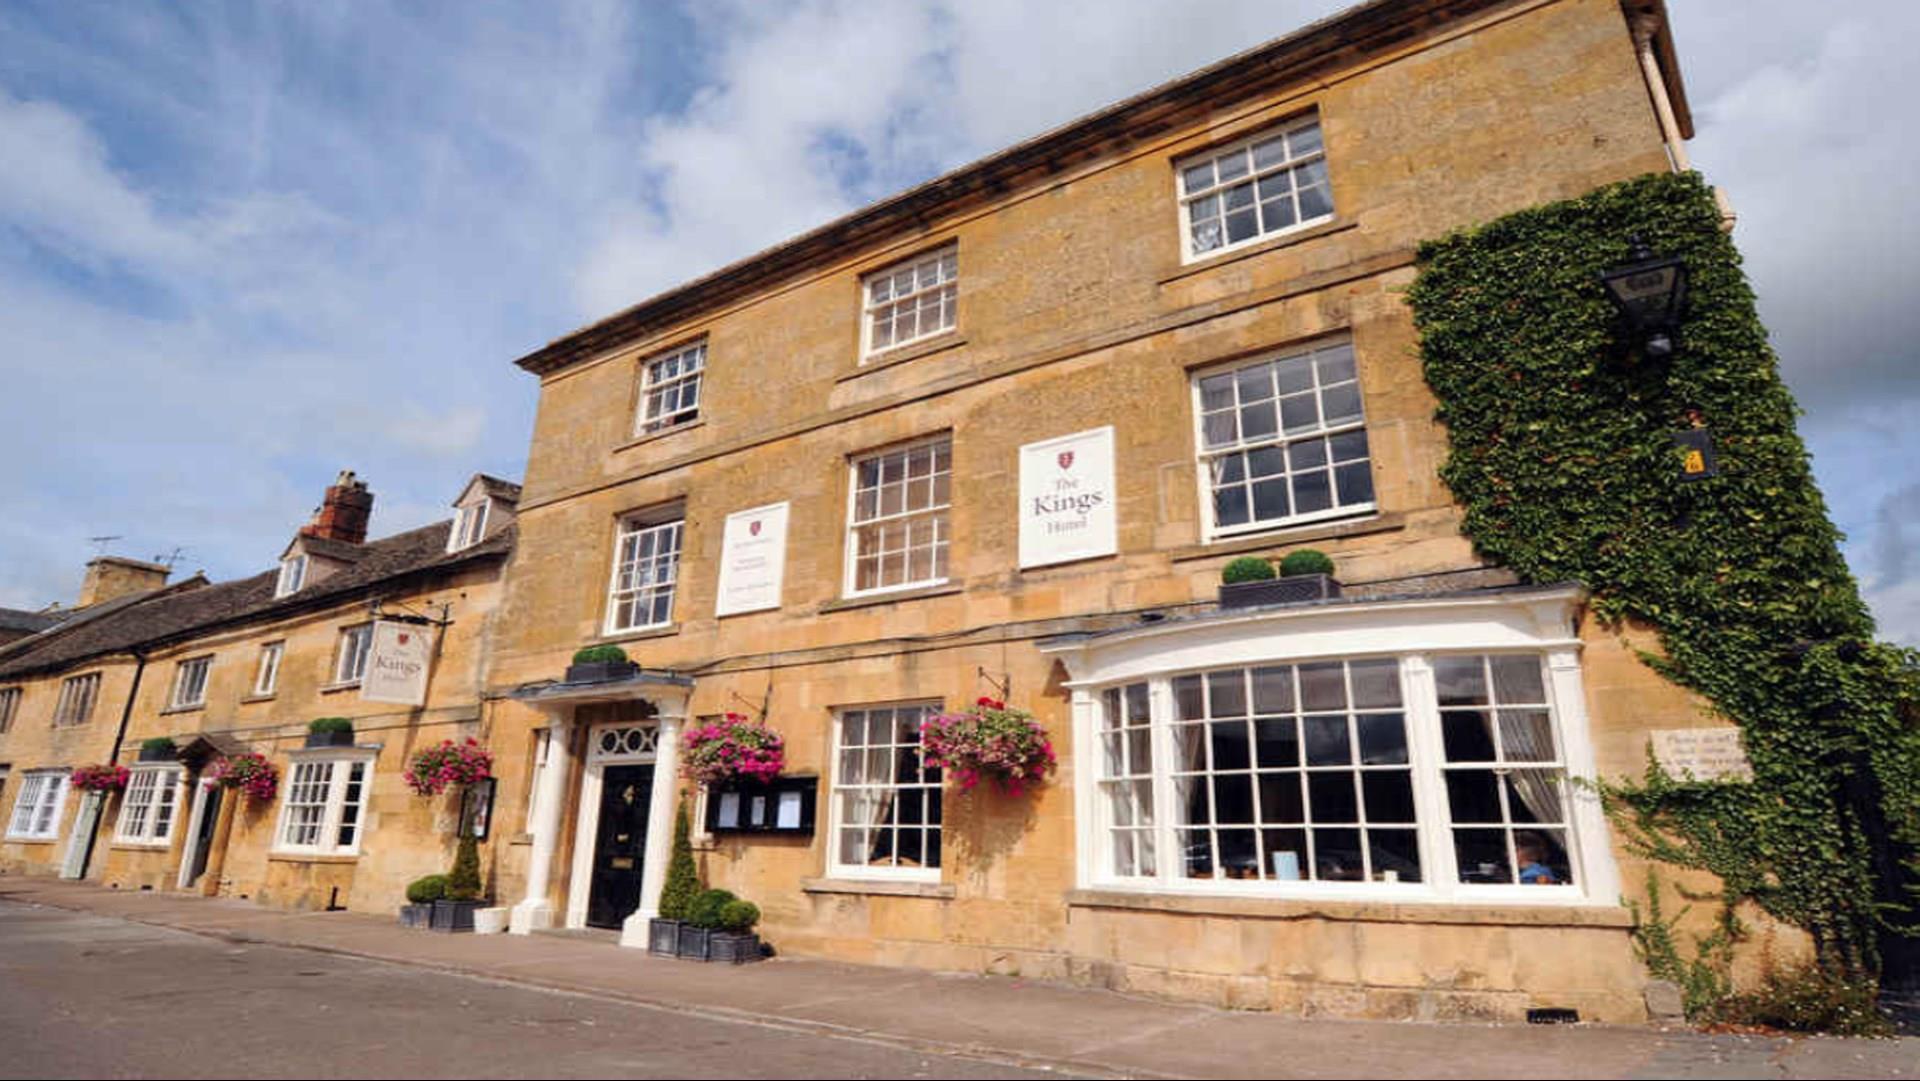 The Kings Hotel in Chipping Campden, GB1